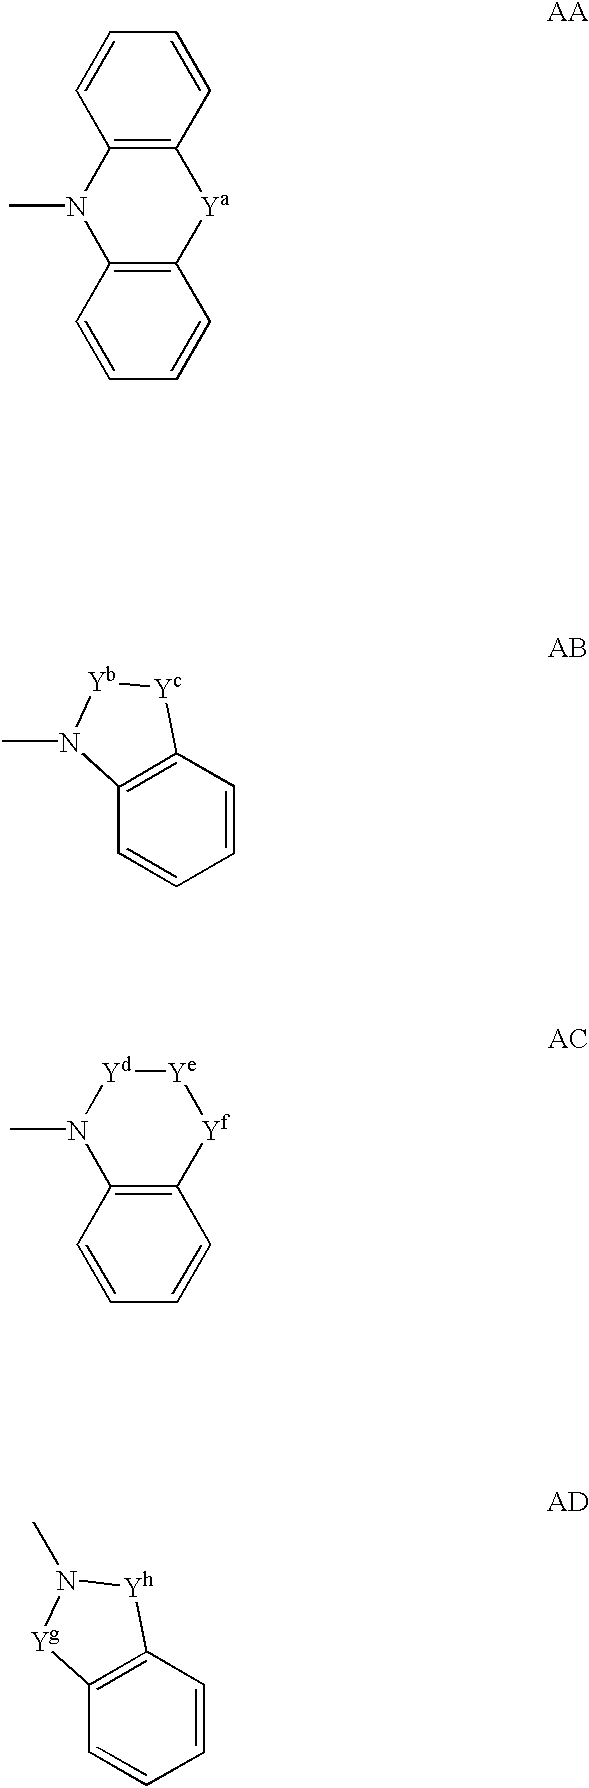 Spiropiperidine compounds as ligands for ORL-1 receptor